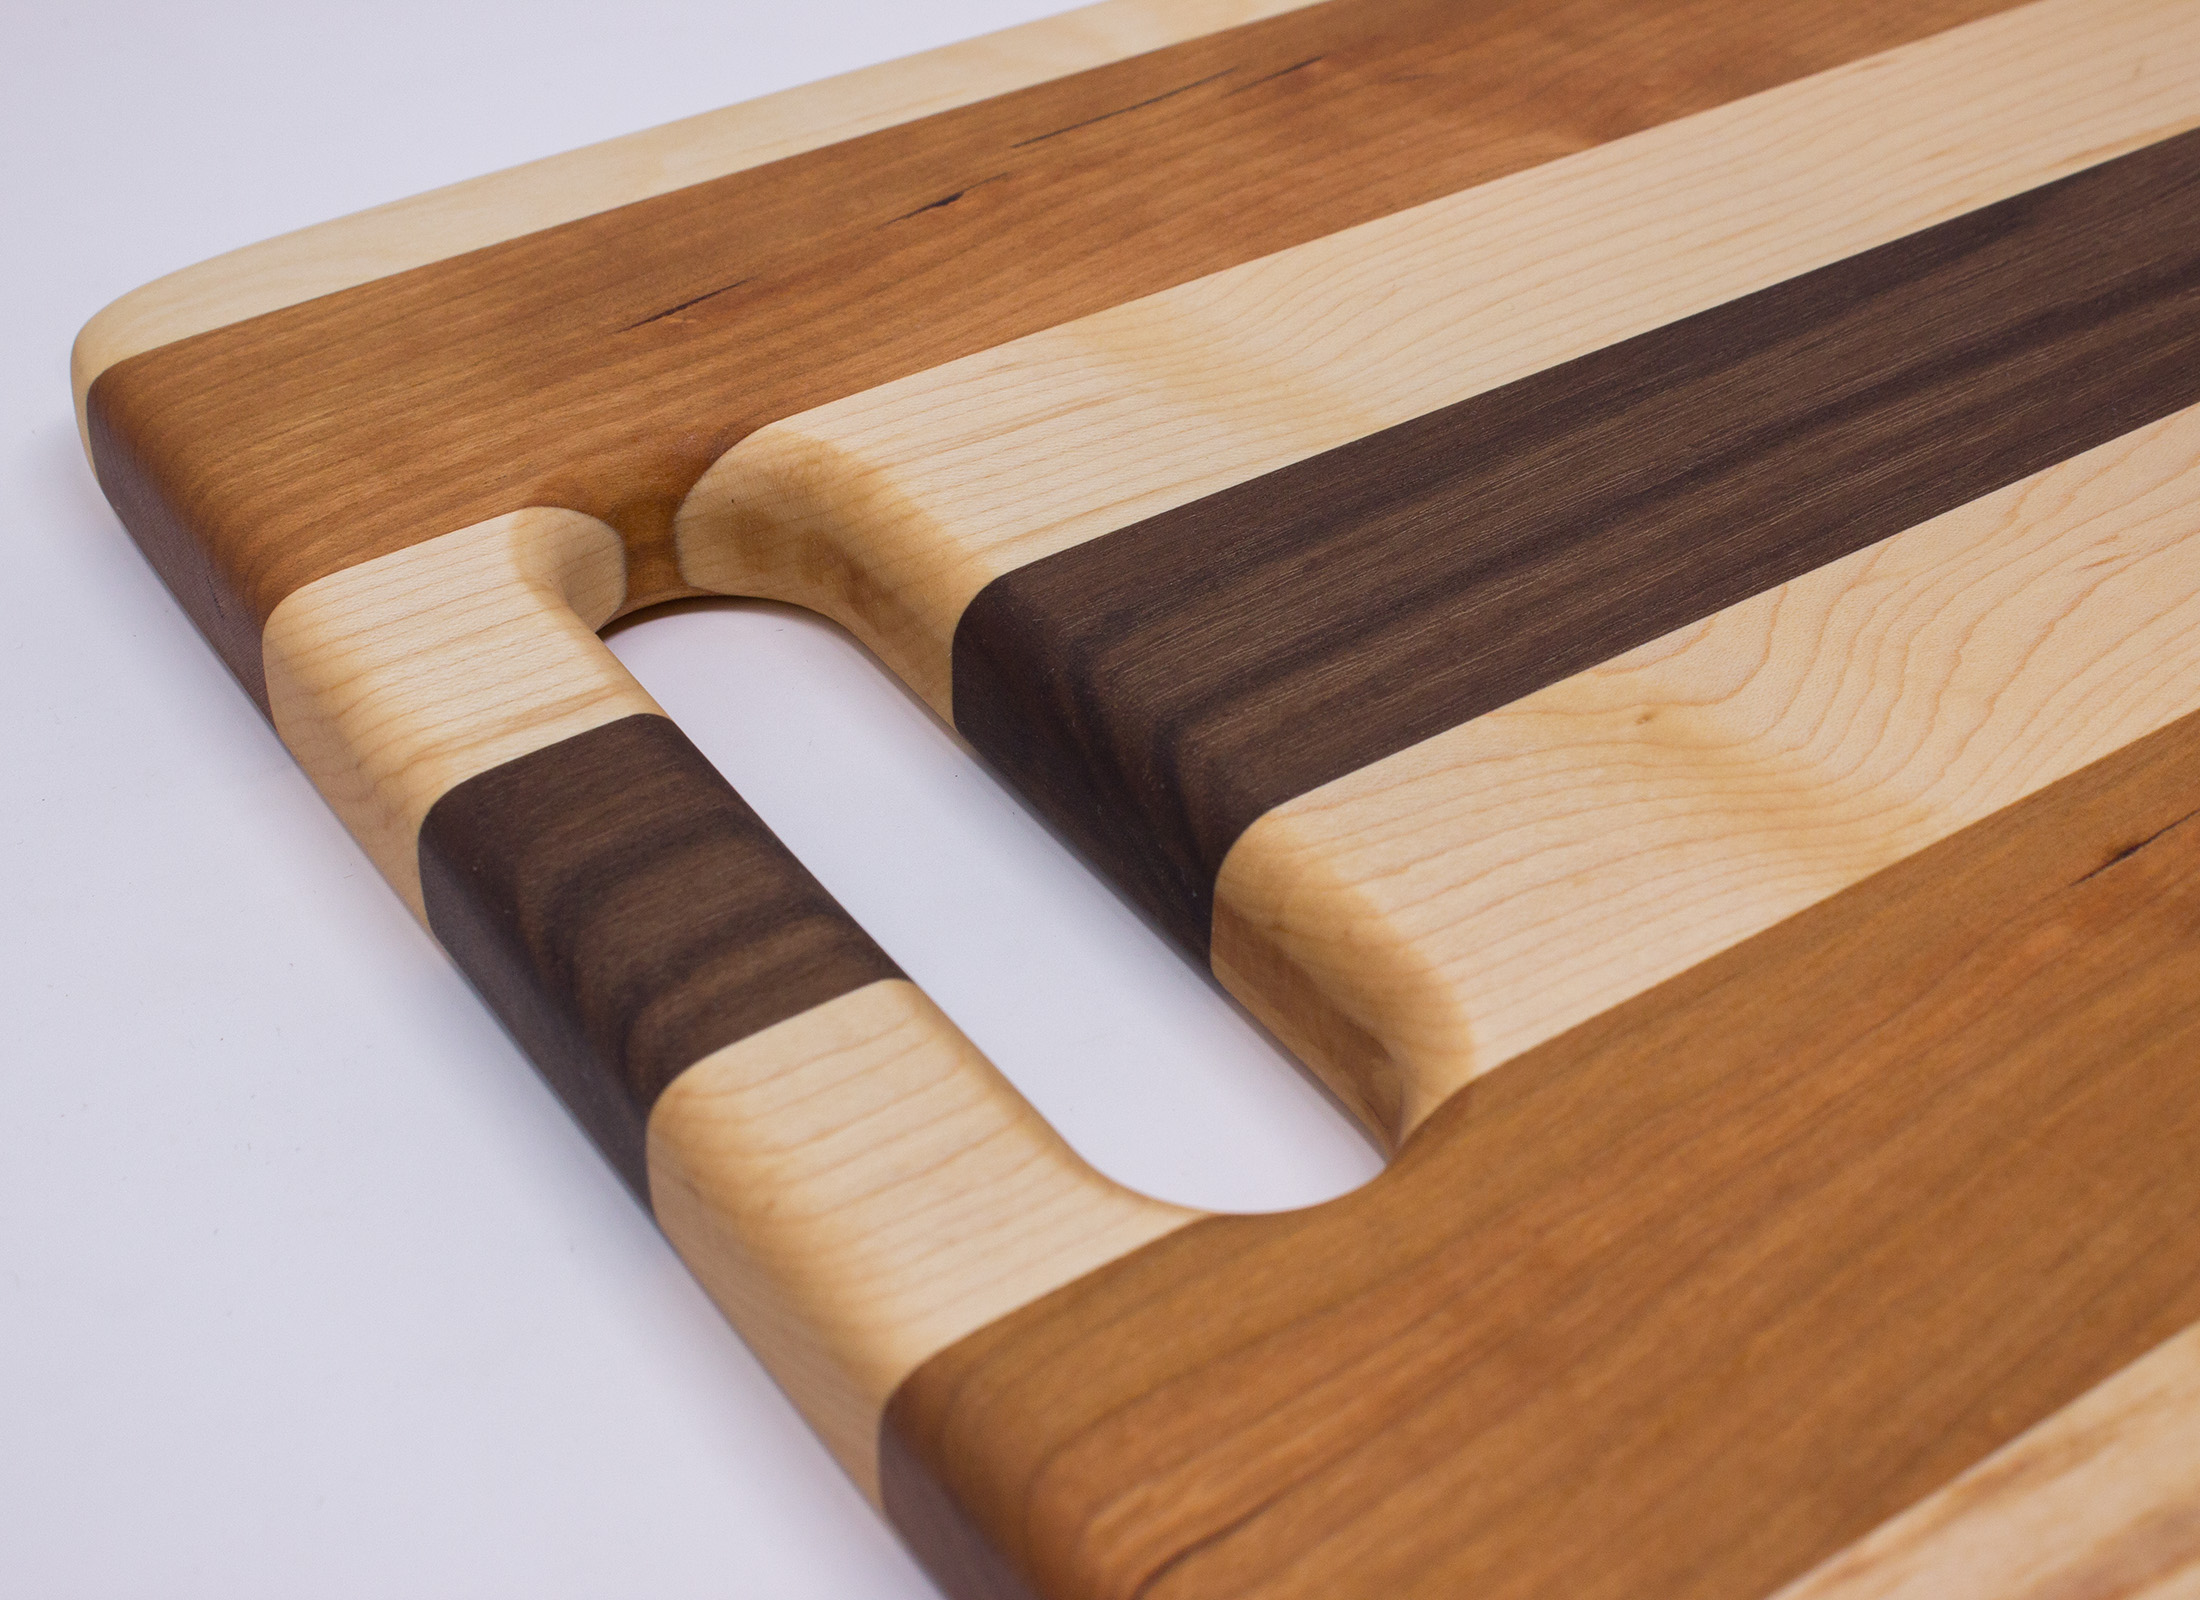 https://www.rockfordwoodcrafts.com/wp-content/uploads/Maple-Cherry-and-Walnut-Cutting-Board-with-Handle-Handle-Close-Up.jpg